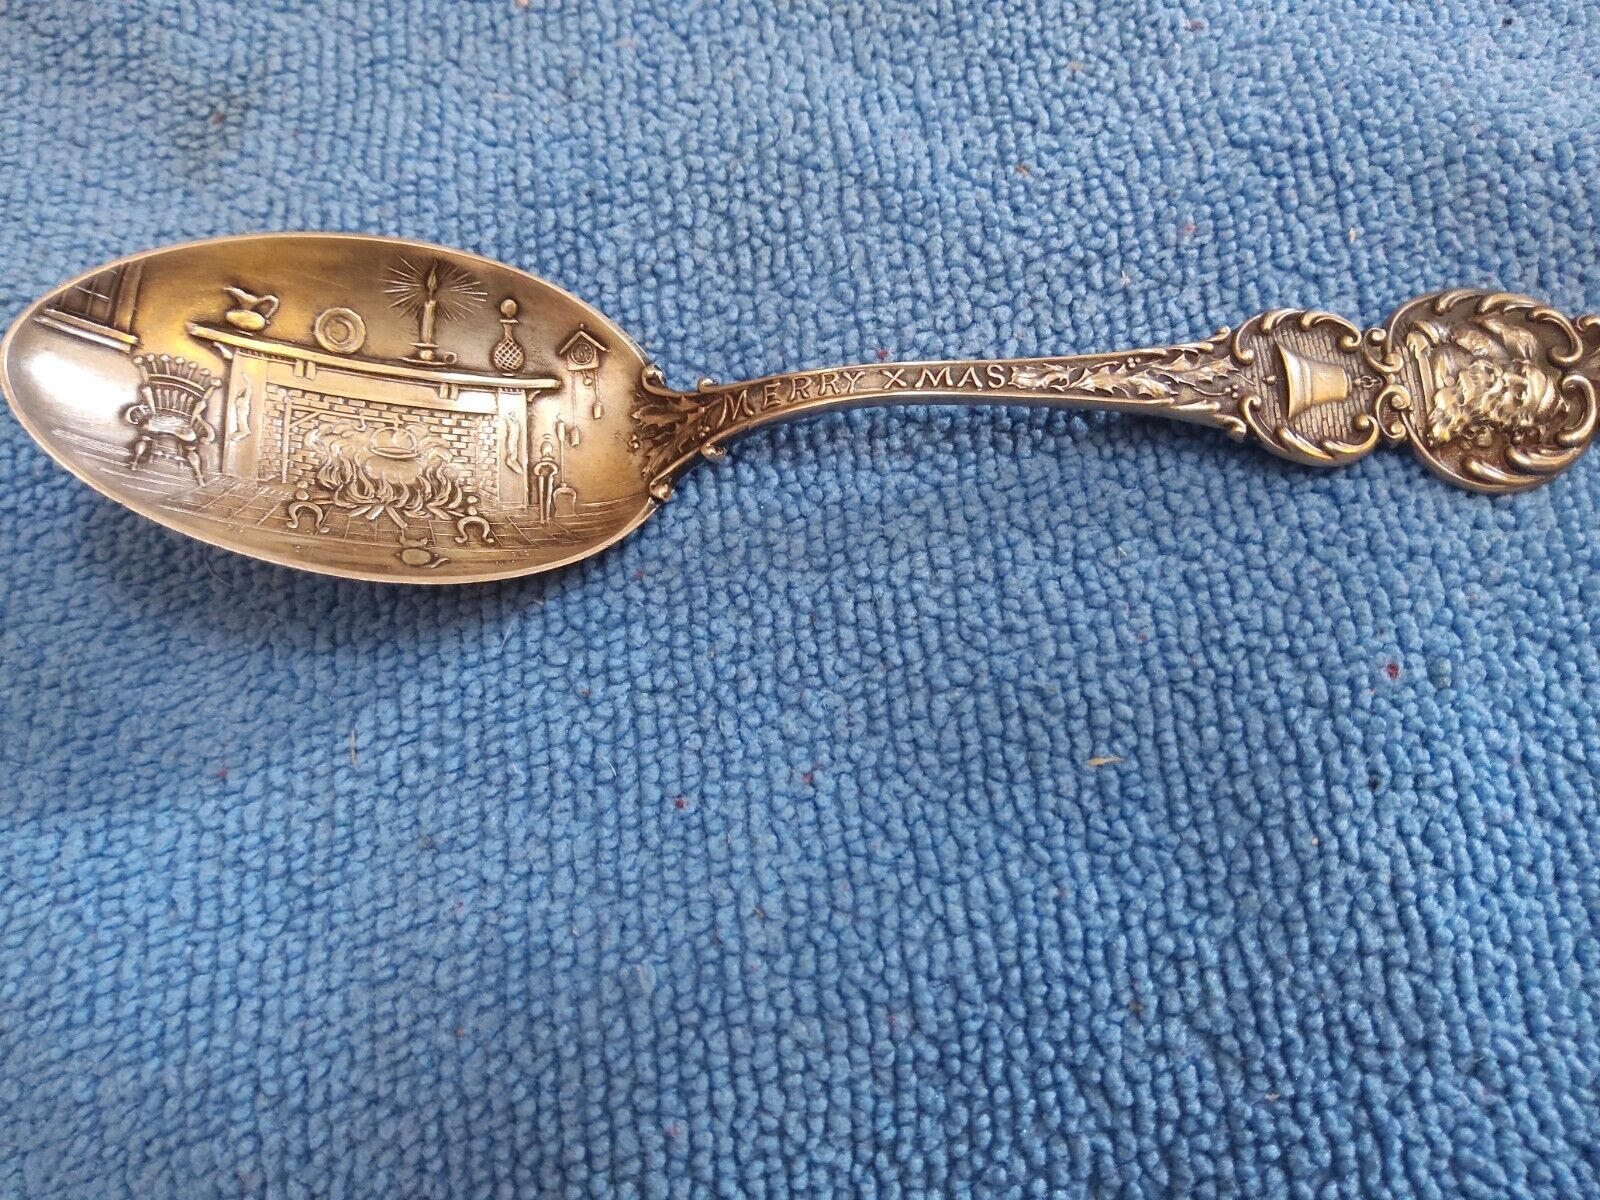 ANTIQUE MERRY CHRISTMAS STERLING SILVER SPOON SANTA BELL FIREPLACE 5 INCH